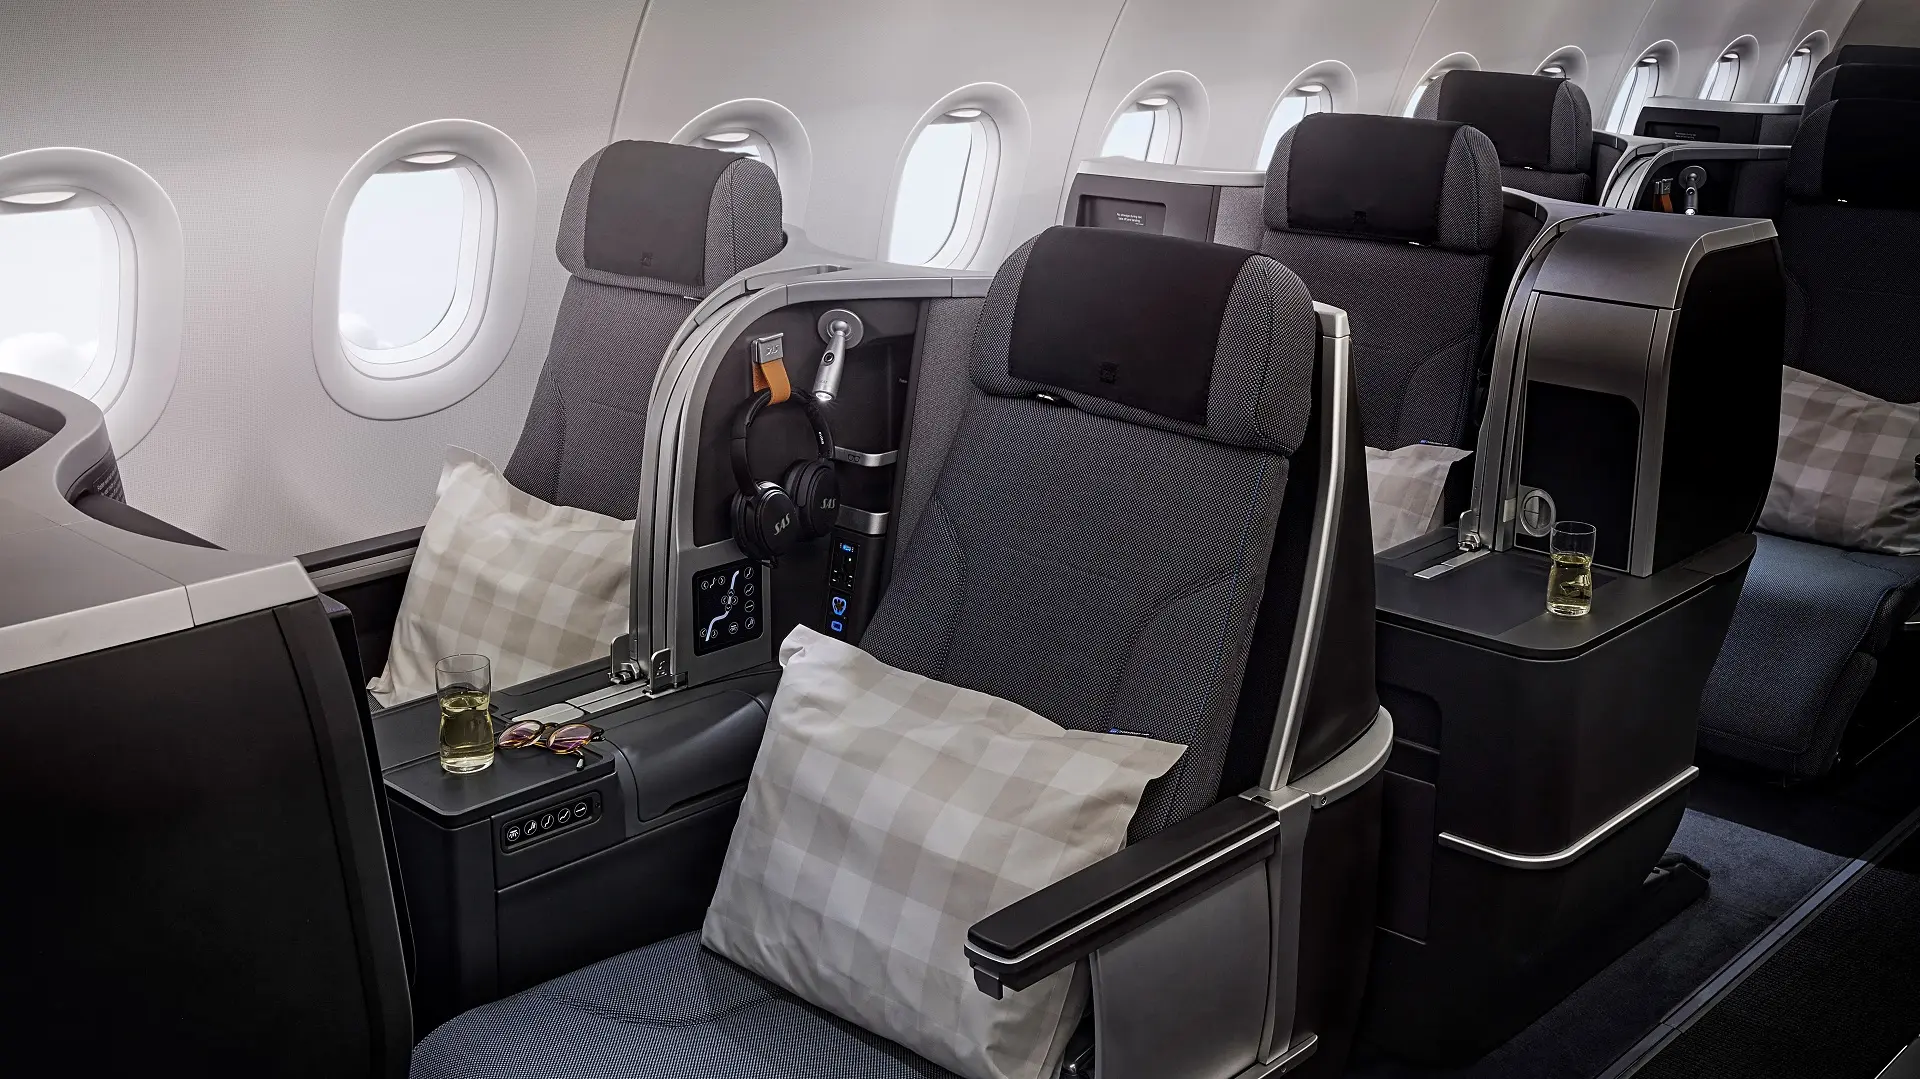 Airlines News - SAS looks to added comfort and boutique Champagne – an interview with its CEO, Anko Van der Werff